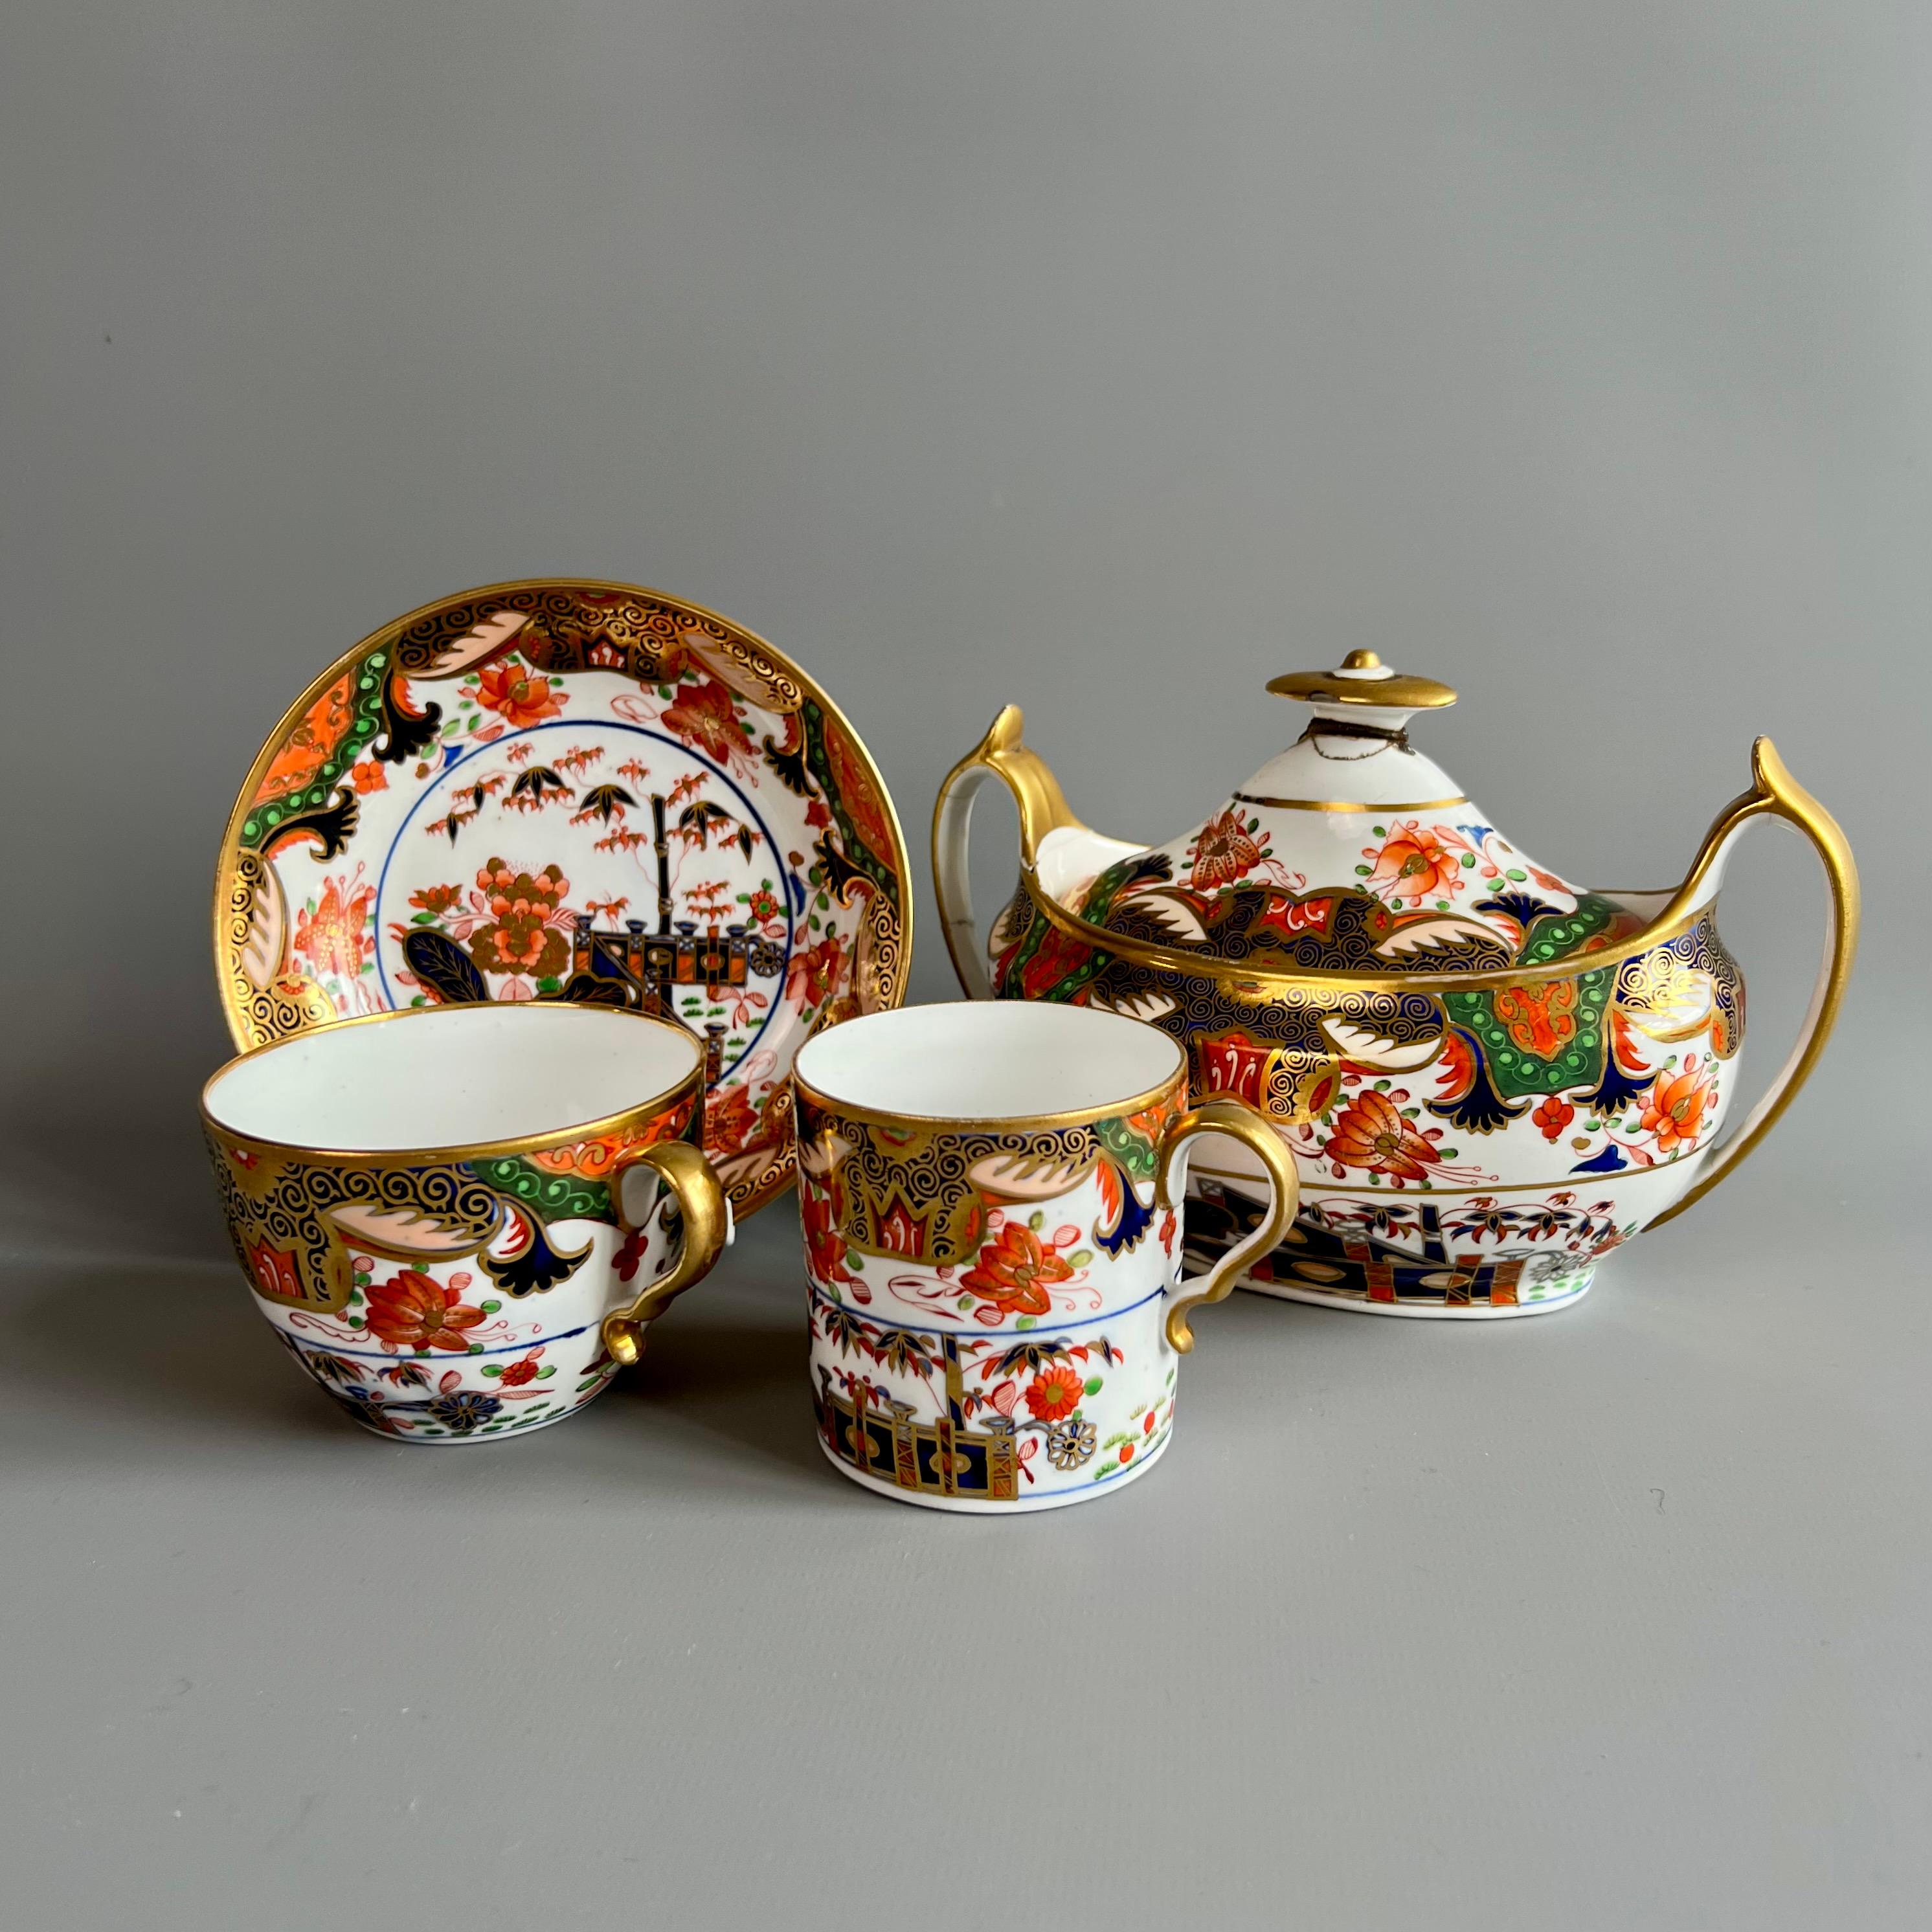 This is a beautiful true trio made by Spode around 1810. The set is decorated in the famous Imari Tobacco Leaf pattern 967. In the early 19th Century, cups and saucers were sold as 